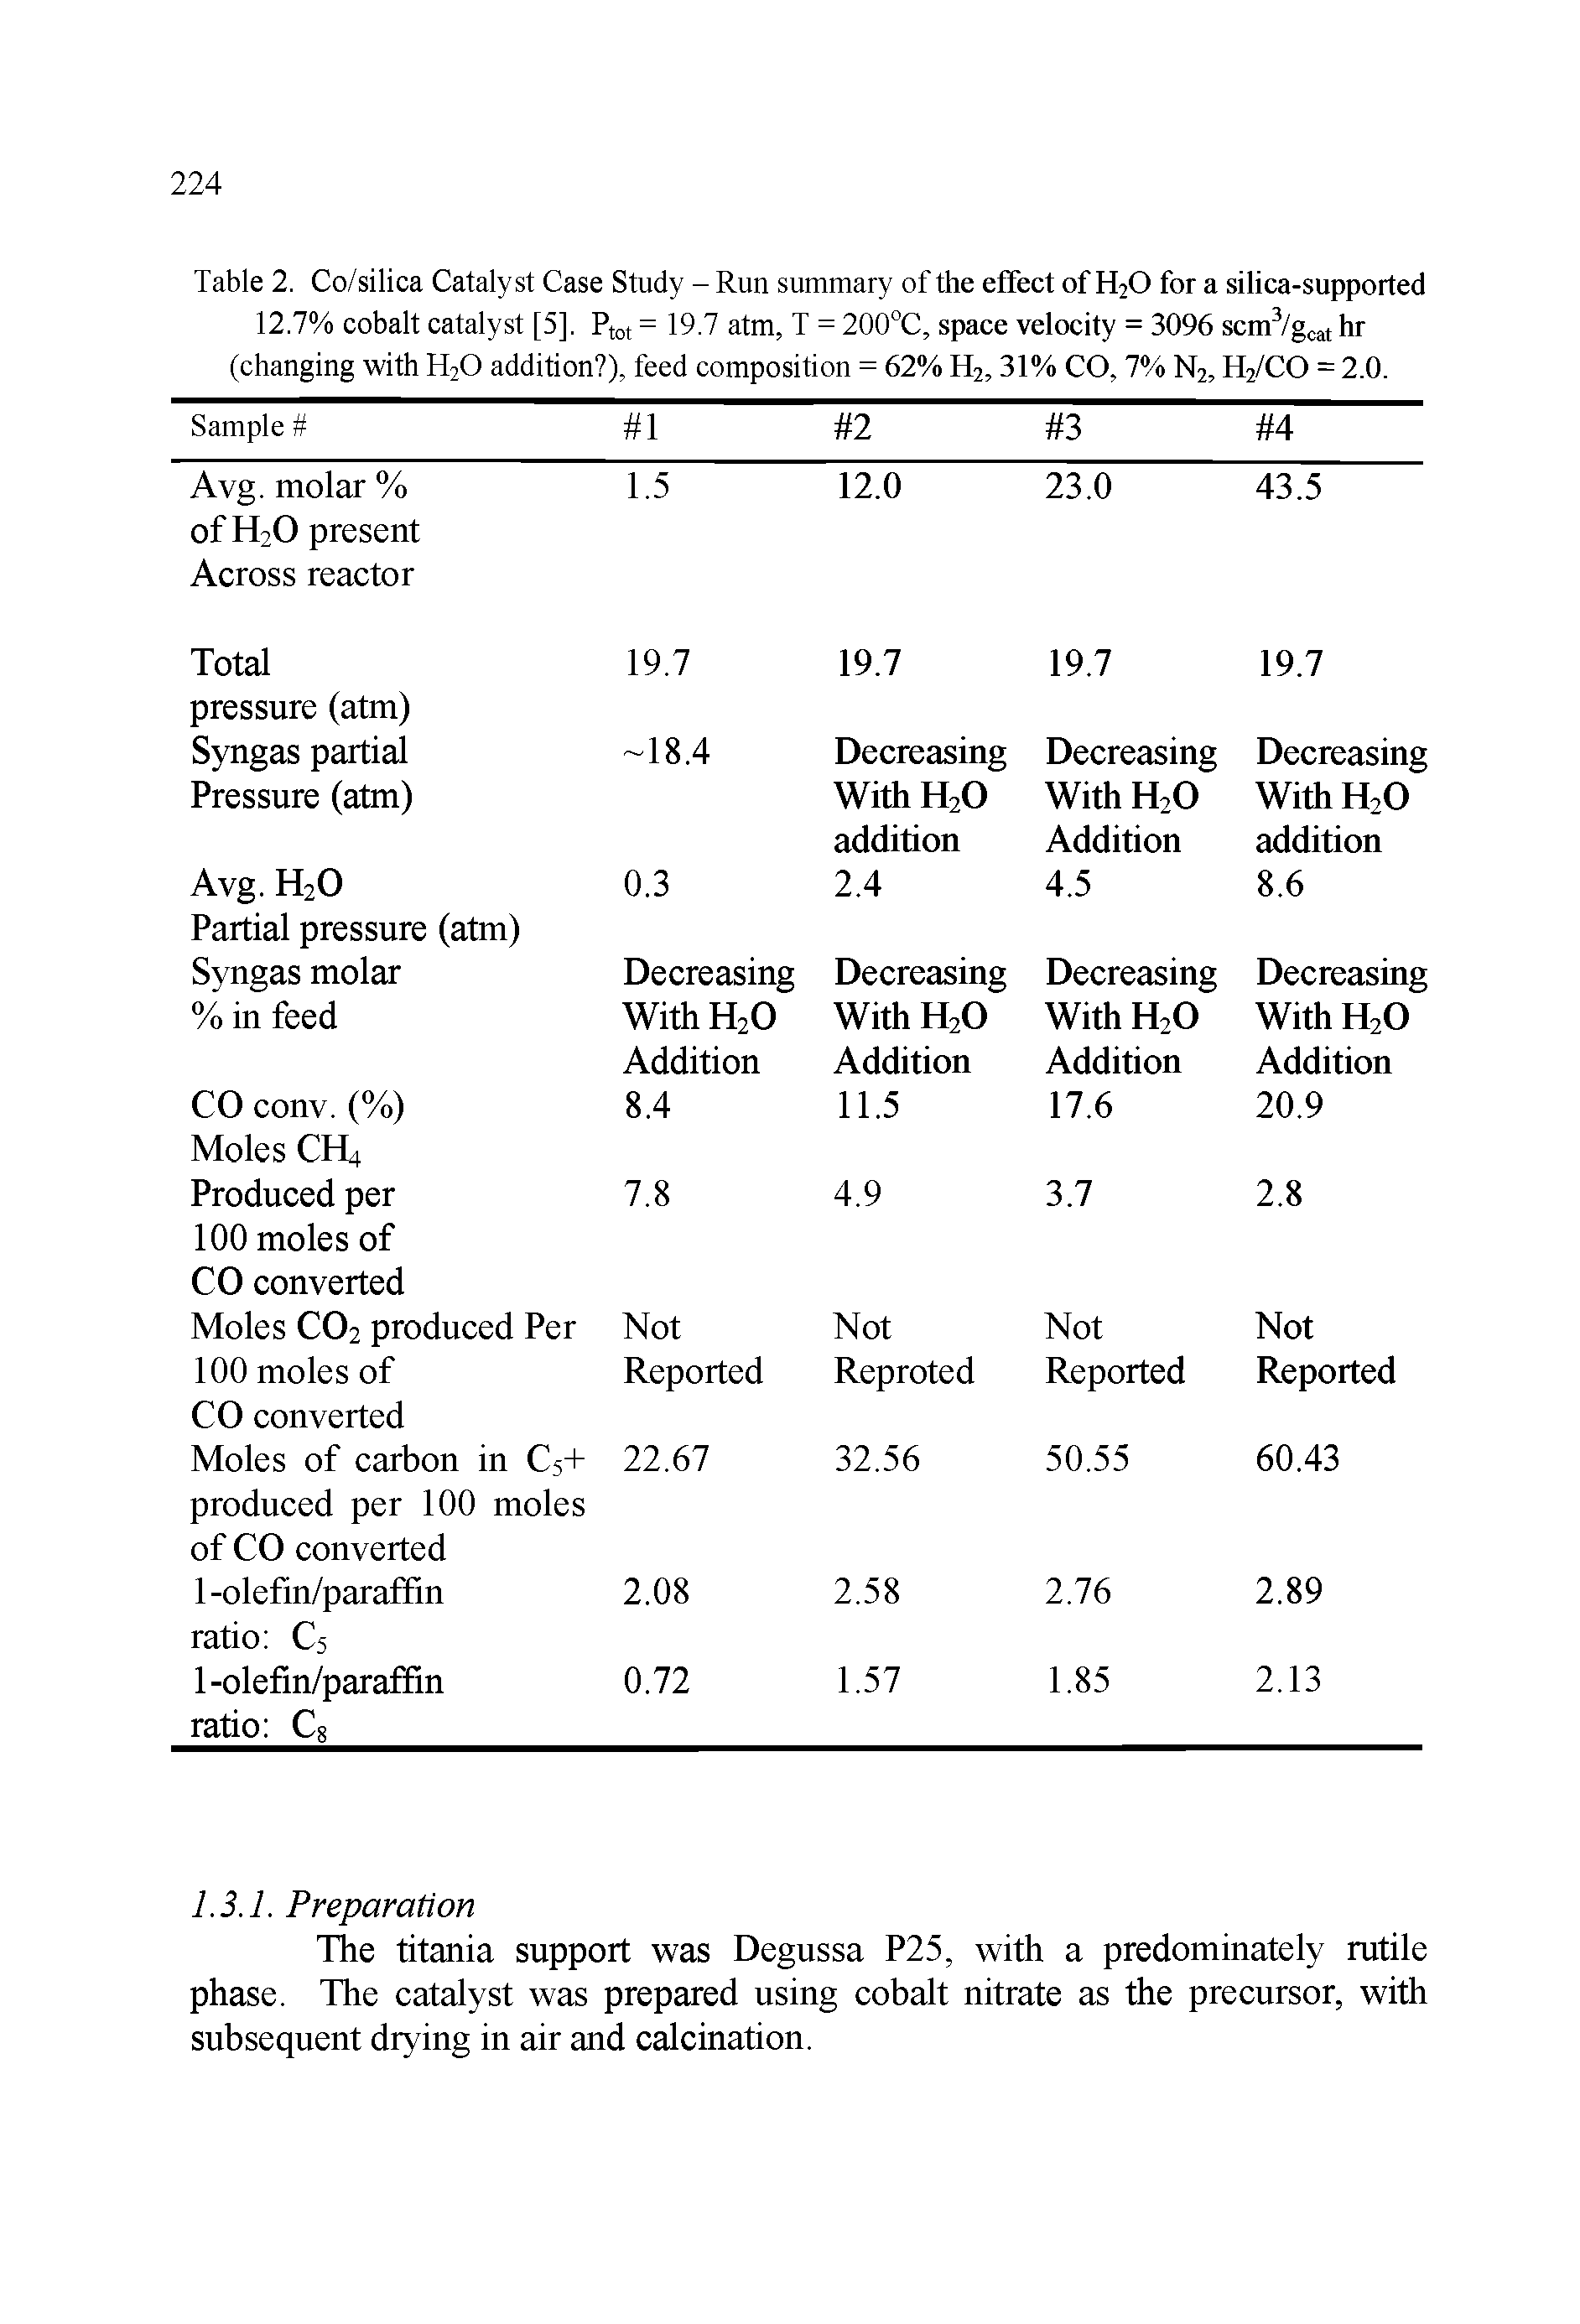 Table 2. Co/silica Catalyst Case Study - Run summary of the effect of H2O for a silica-supported 12.7% cobalt catalyst [5]. Ptot = 19.7 atm, T = 200°C, space velocity = 3096 scm /gcat hr (changing with H2O addition ), feed composition = 62% H2,31% CO, 7% N2, H2/CO = 2.0.